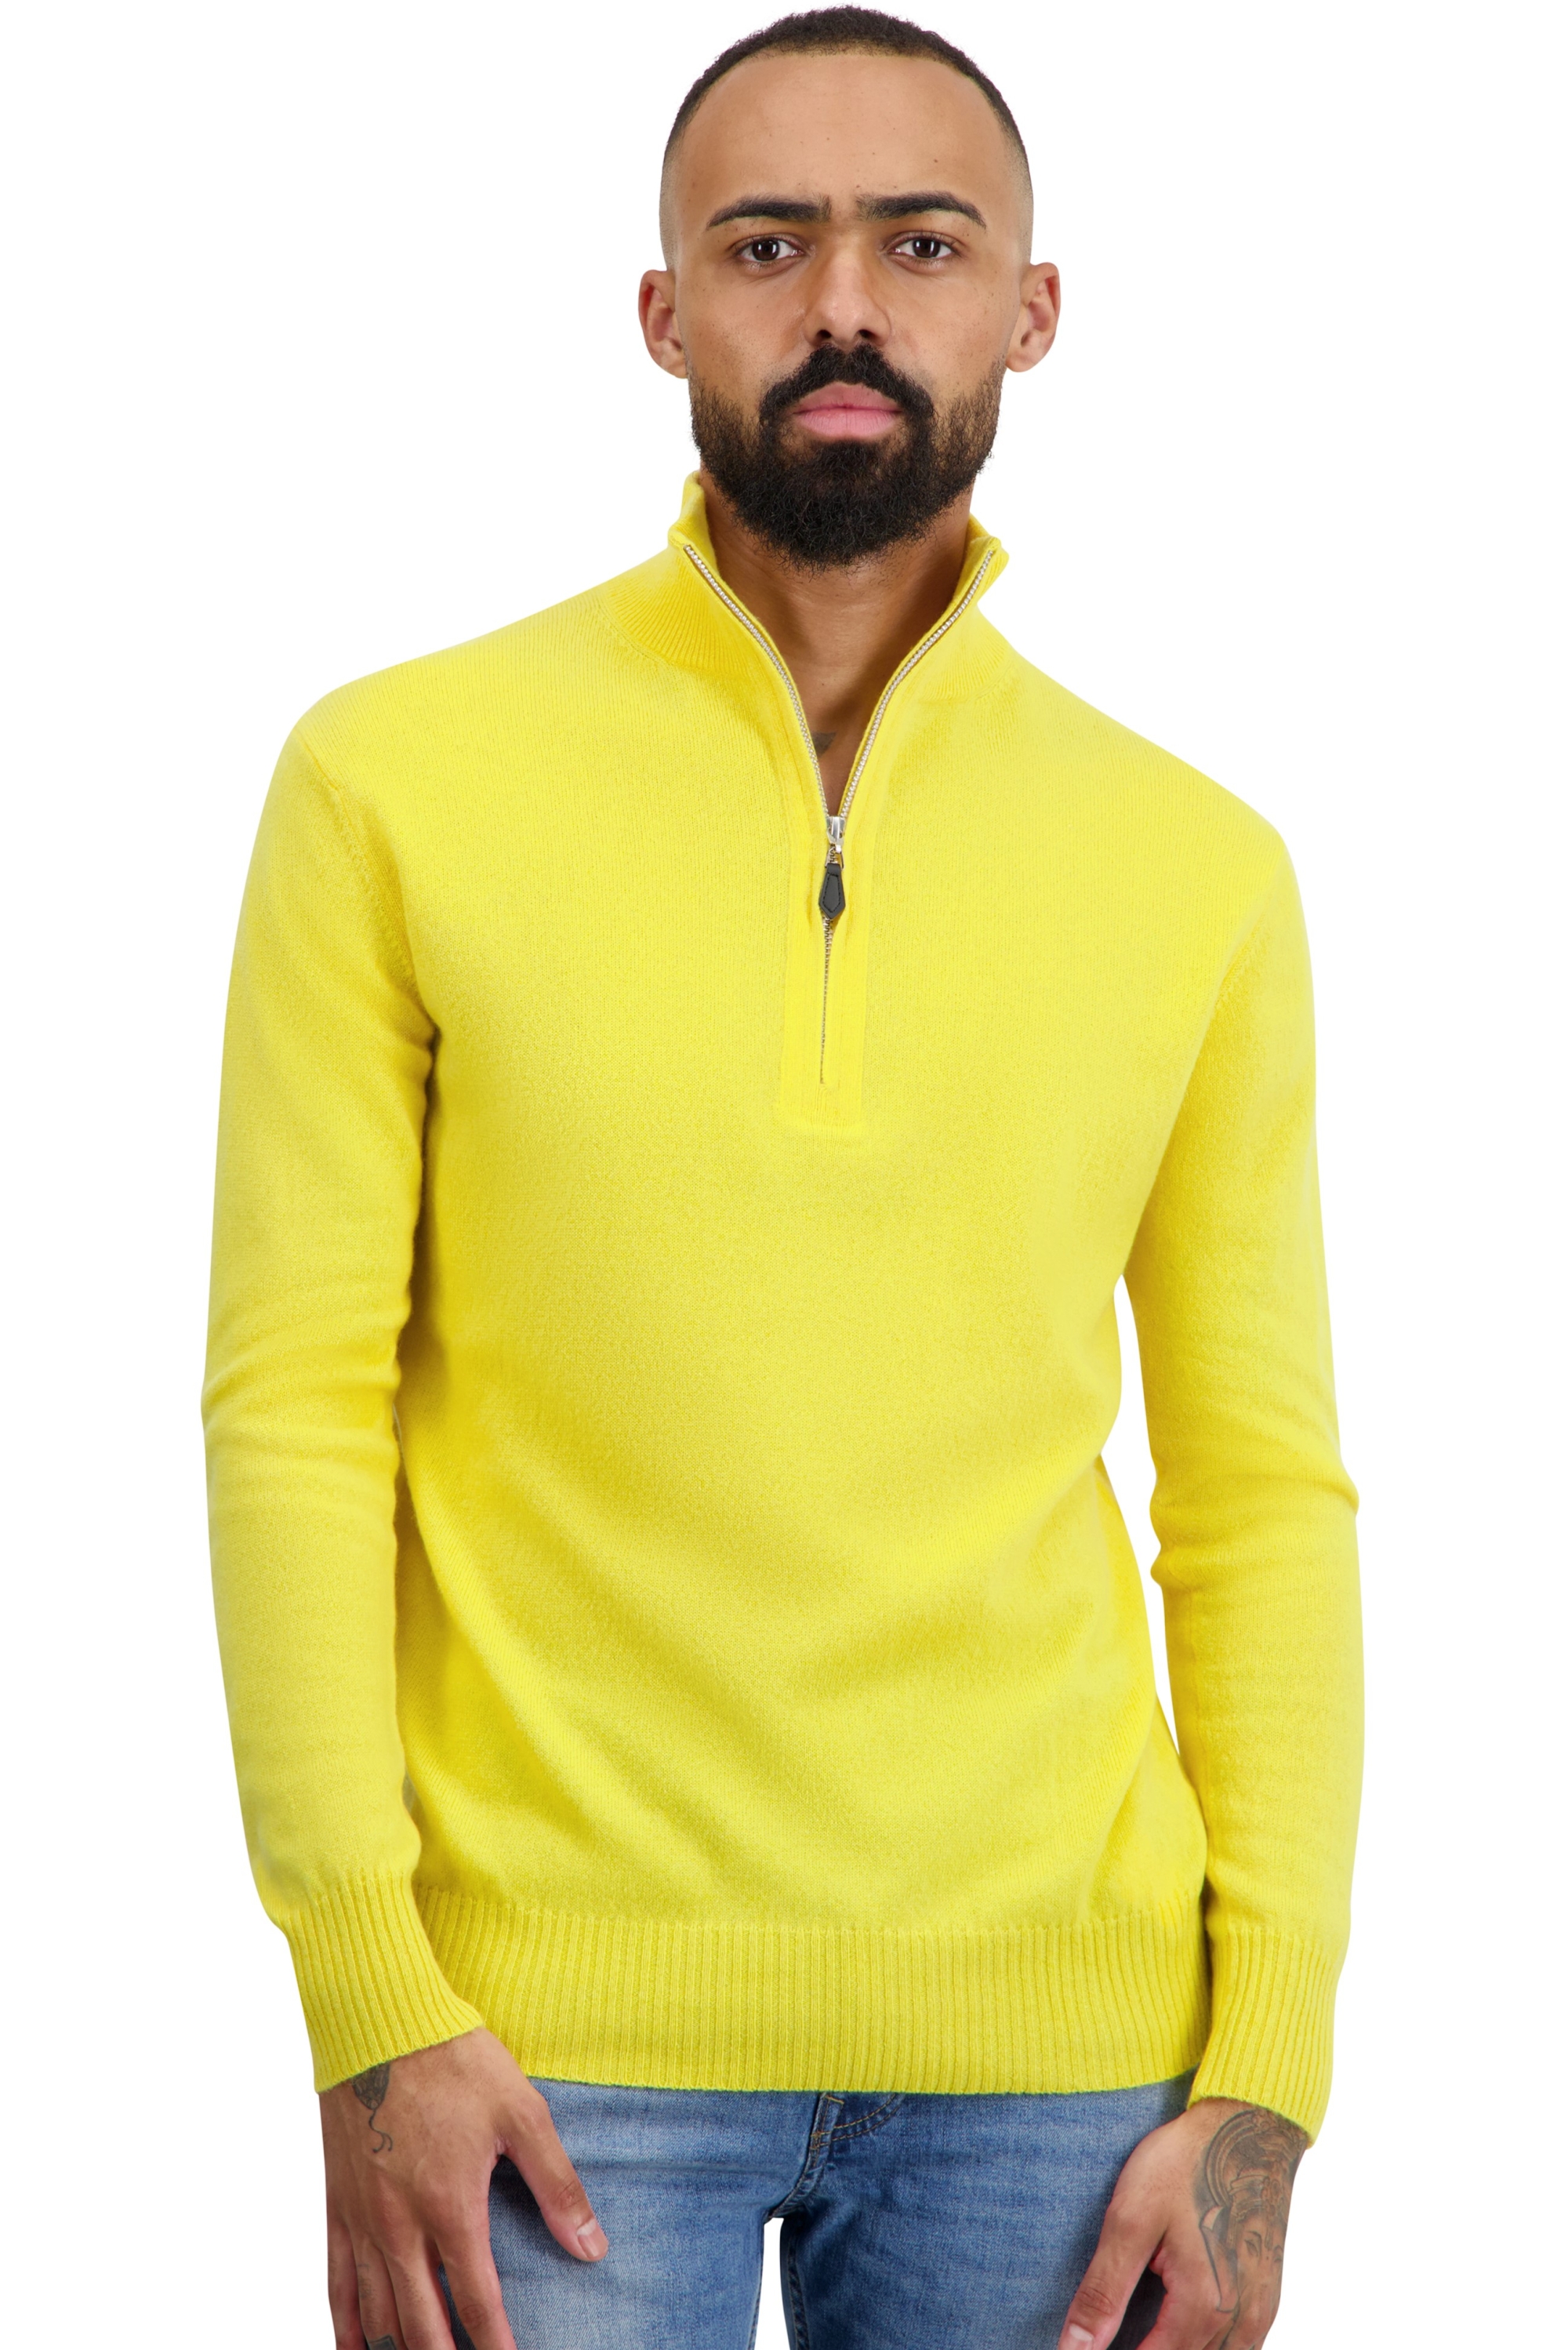 Cashmere men low prices toulon first daffodil xl